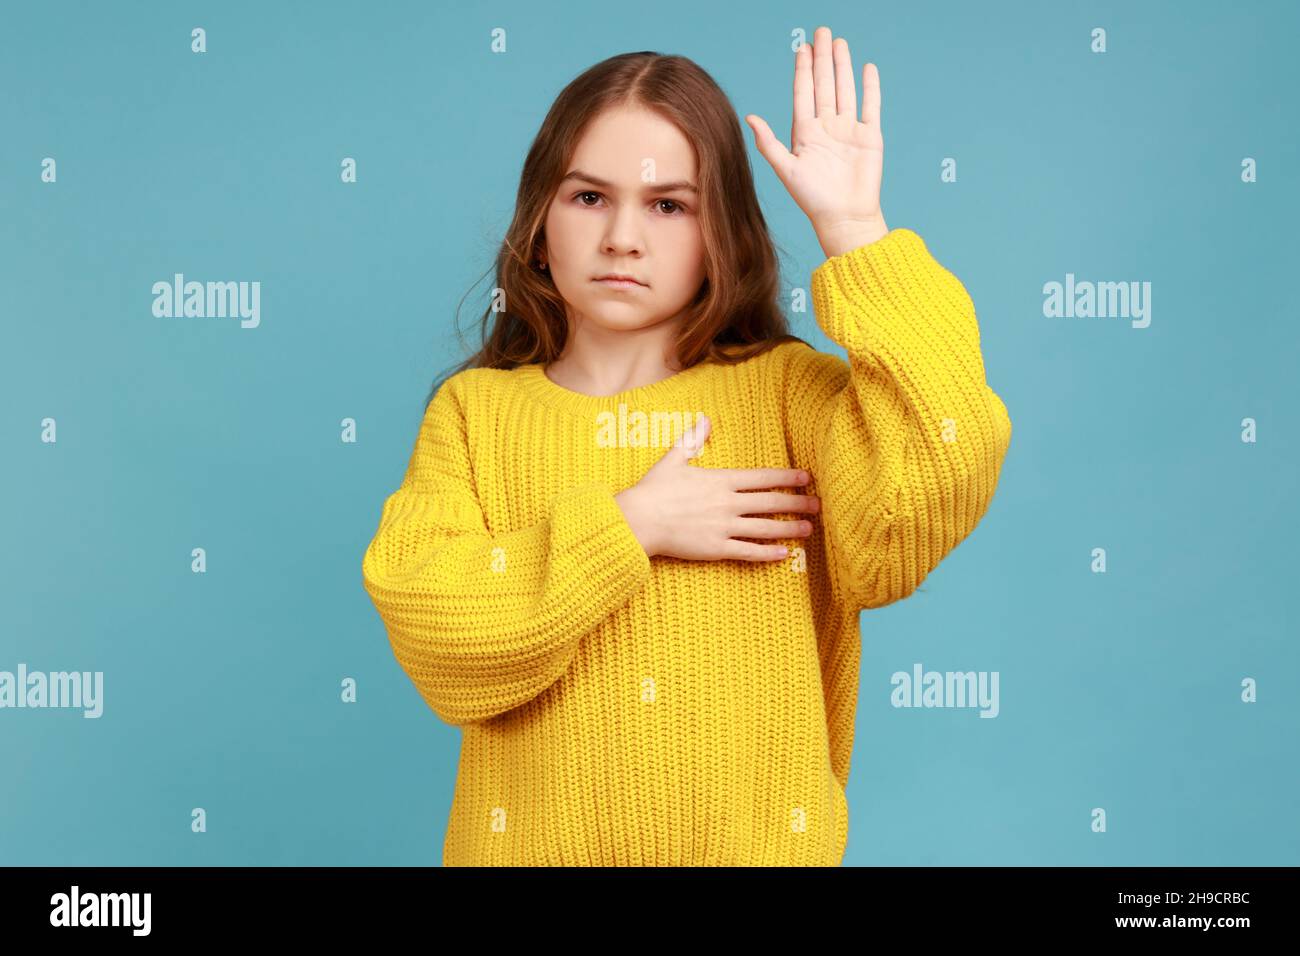 Portrait of serious little girl raising her palm to take oath, child swearing to tell only truth, wearing yellow casual style sweater. Indoor studio shot isolated on blue background. Stock Photo